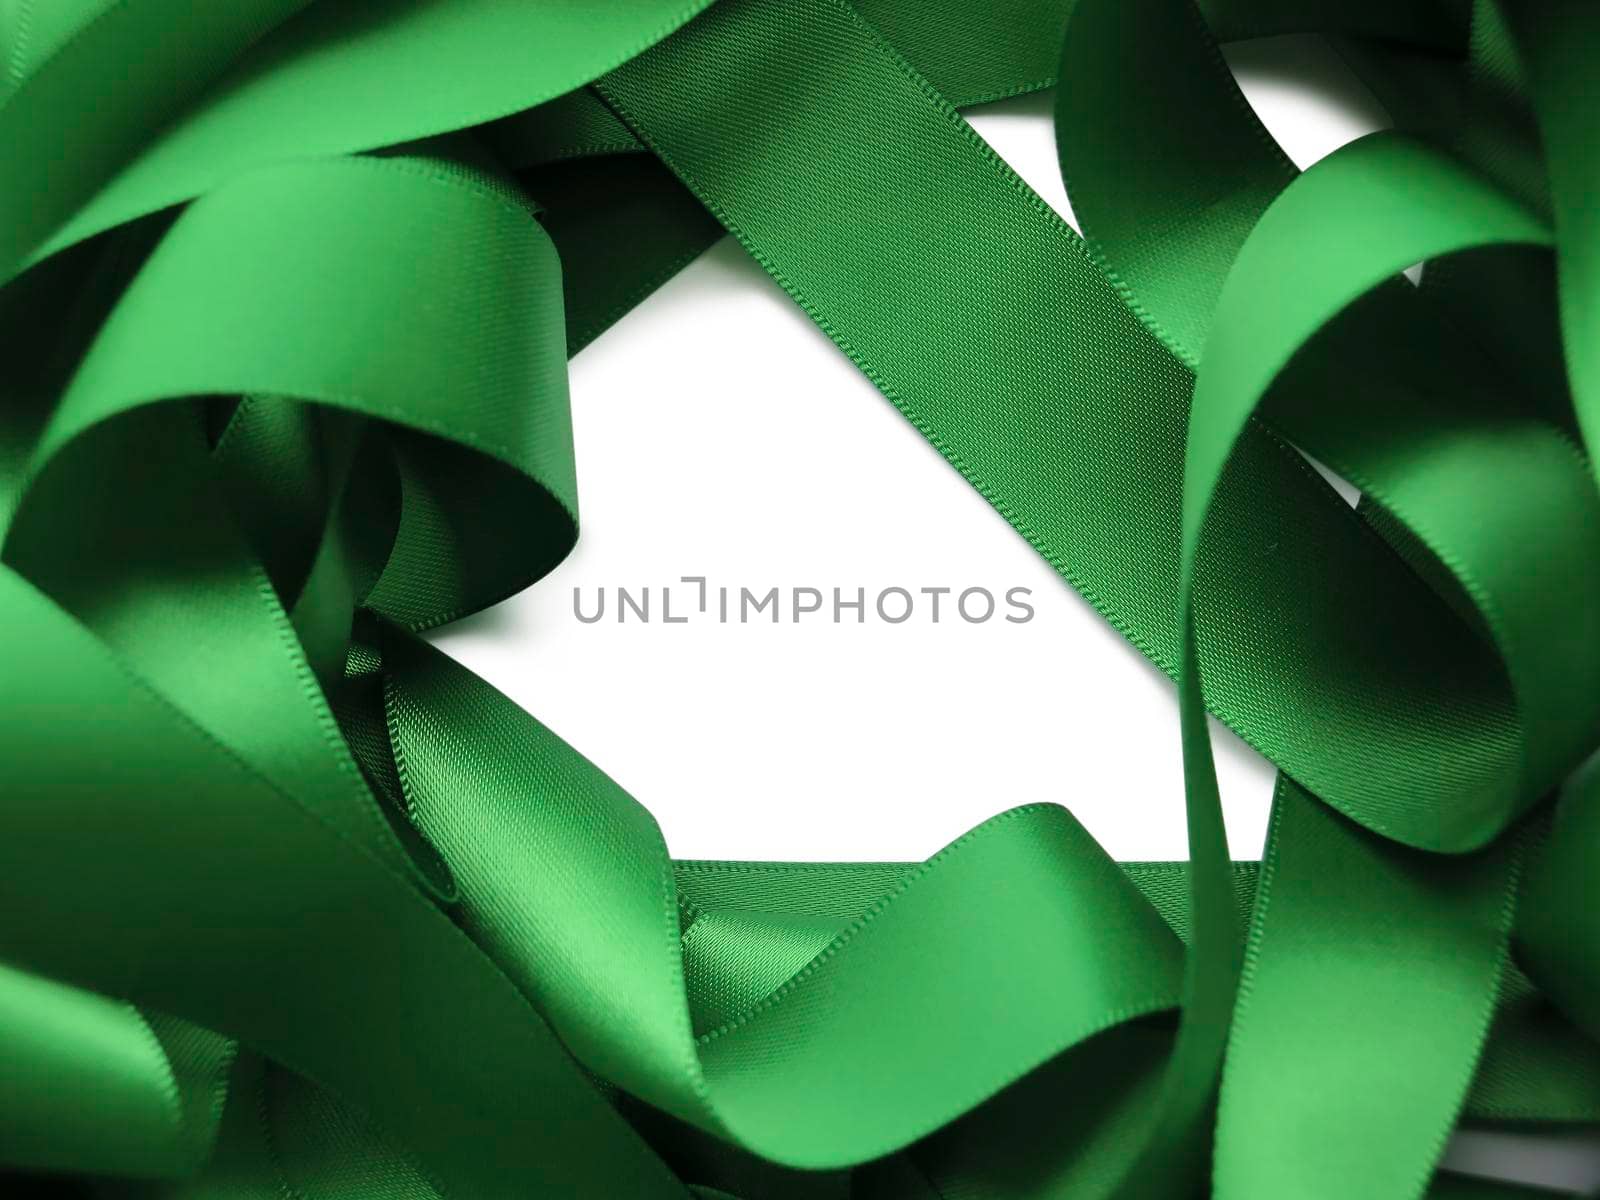 Green ribbon over white background, design element. Clipping Path included